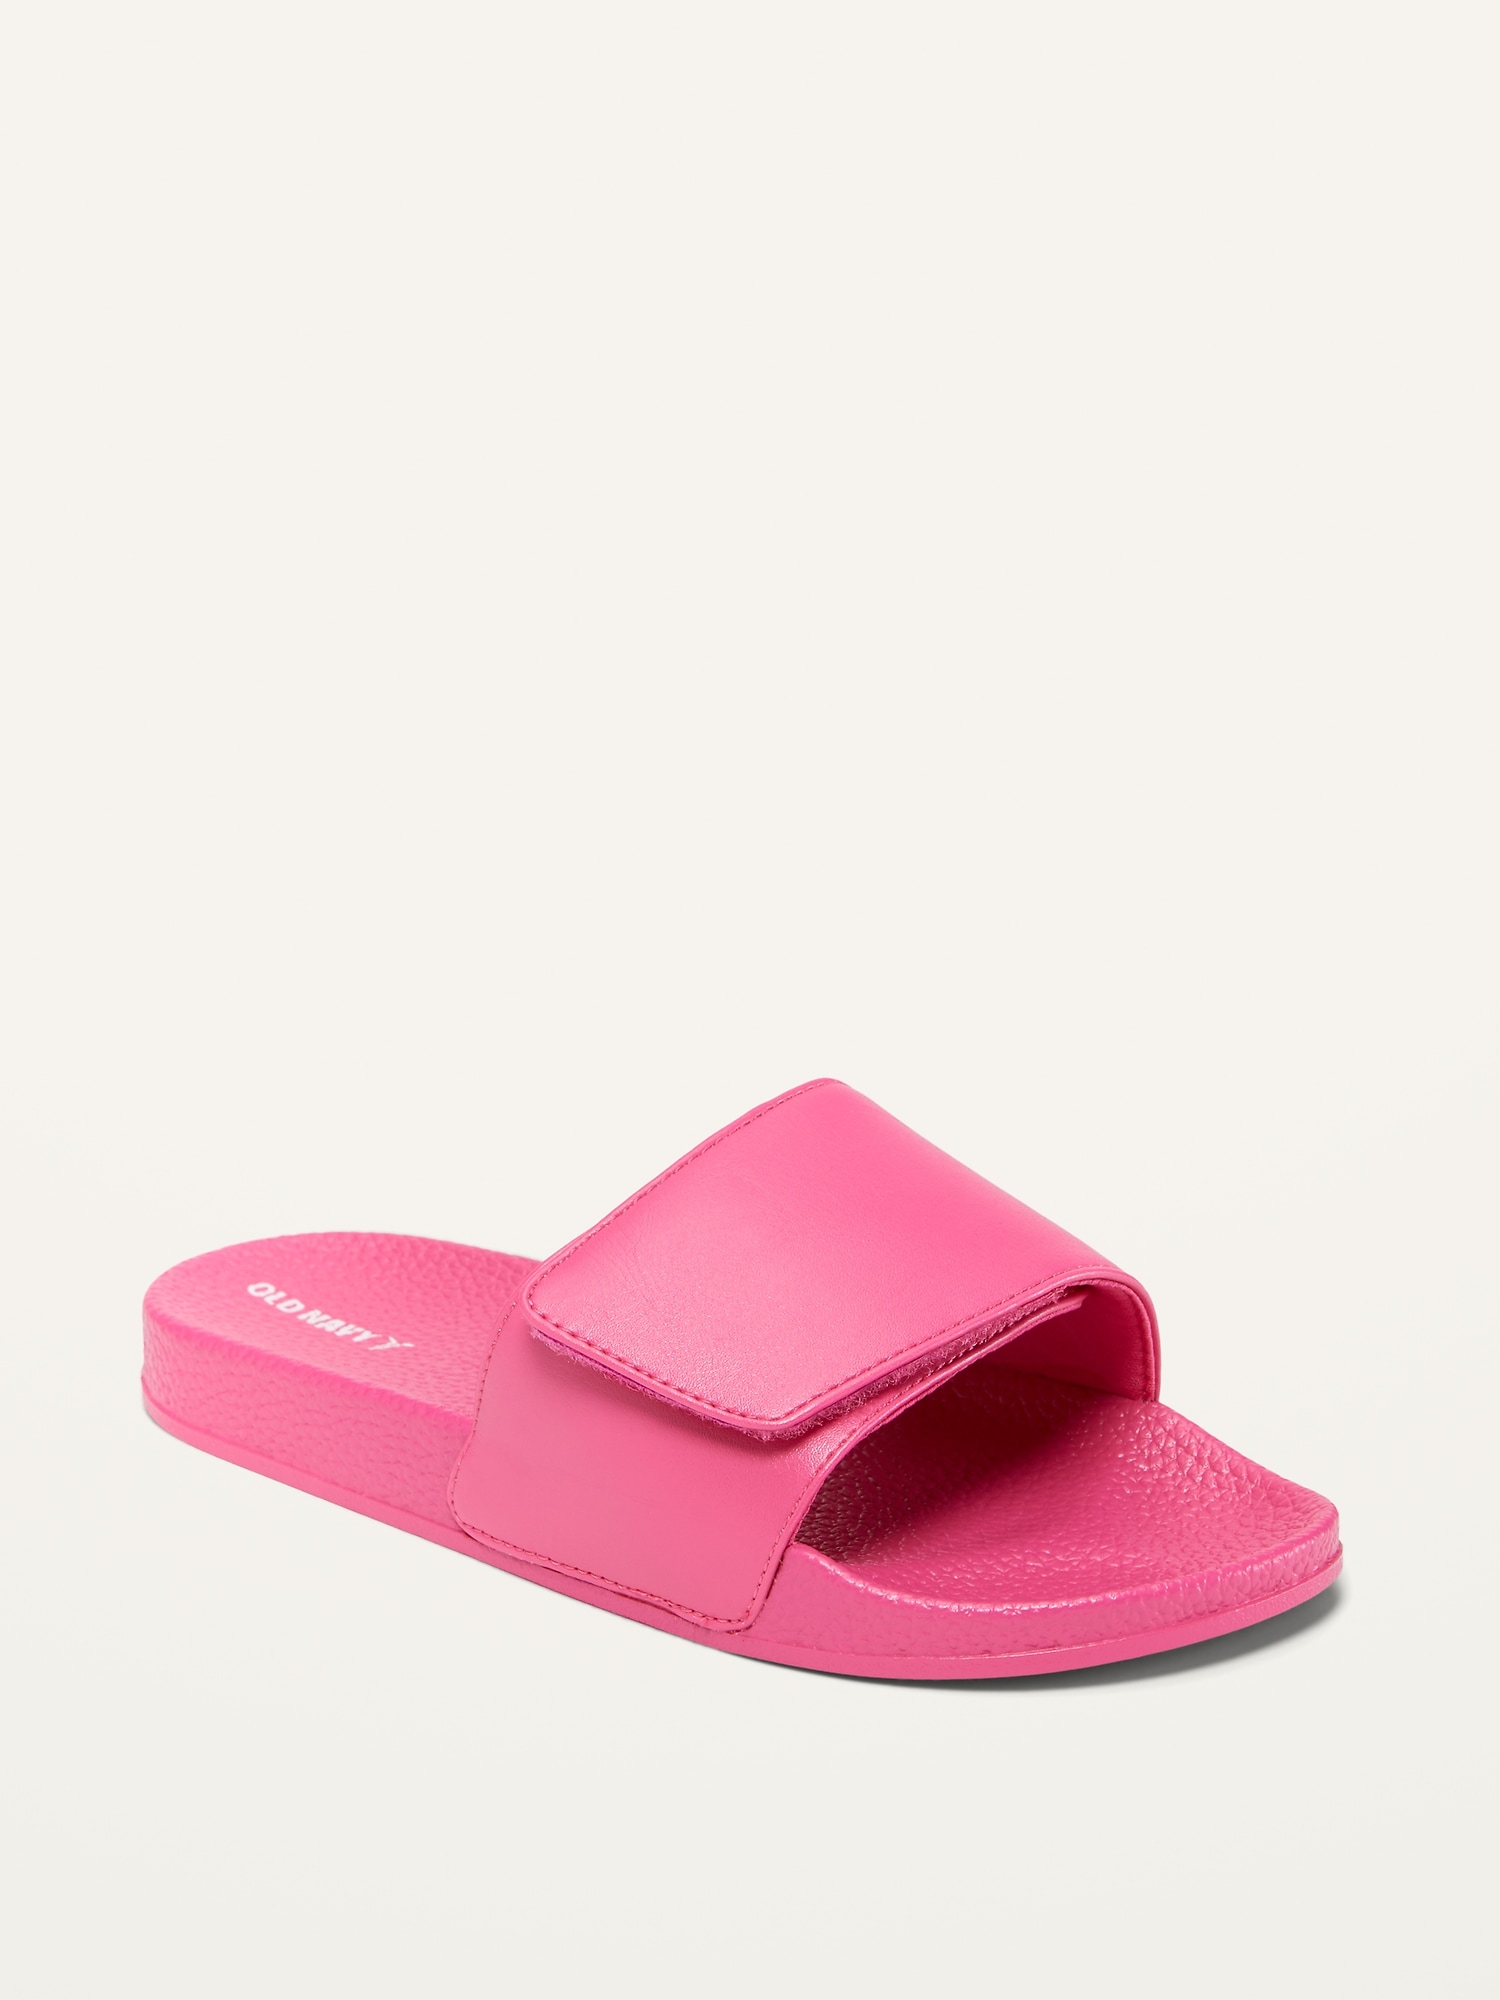 Faux Leather Slide Sandals For Girls Old Navy